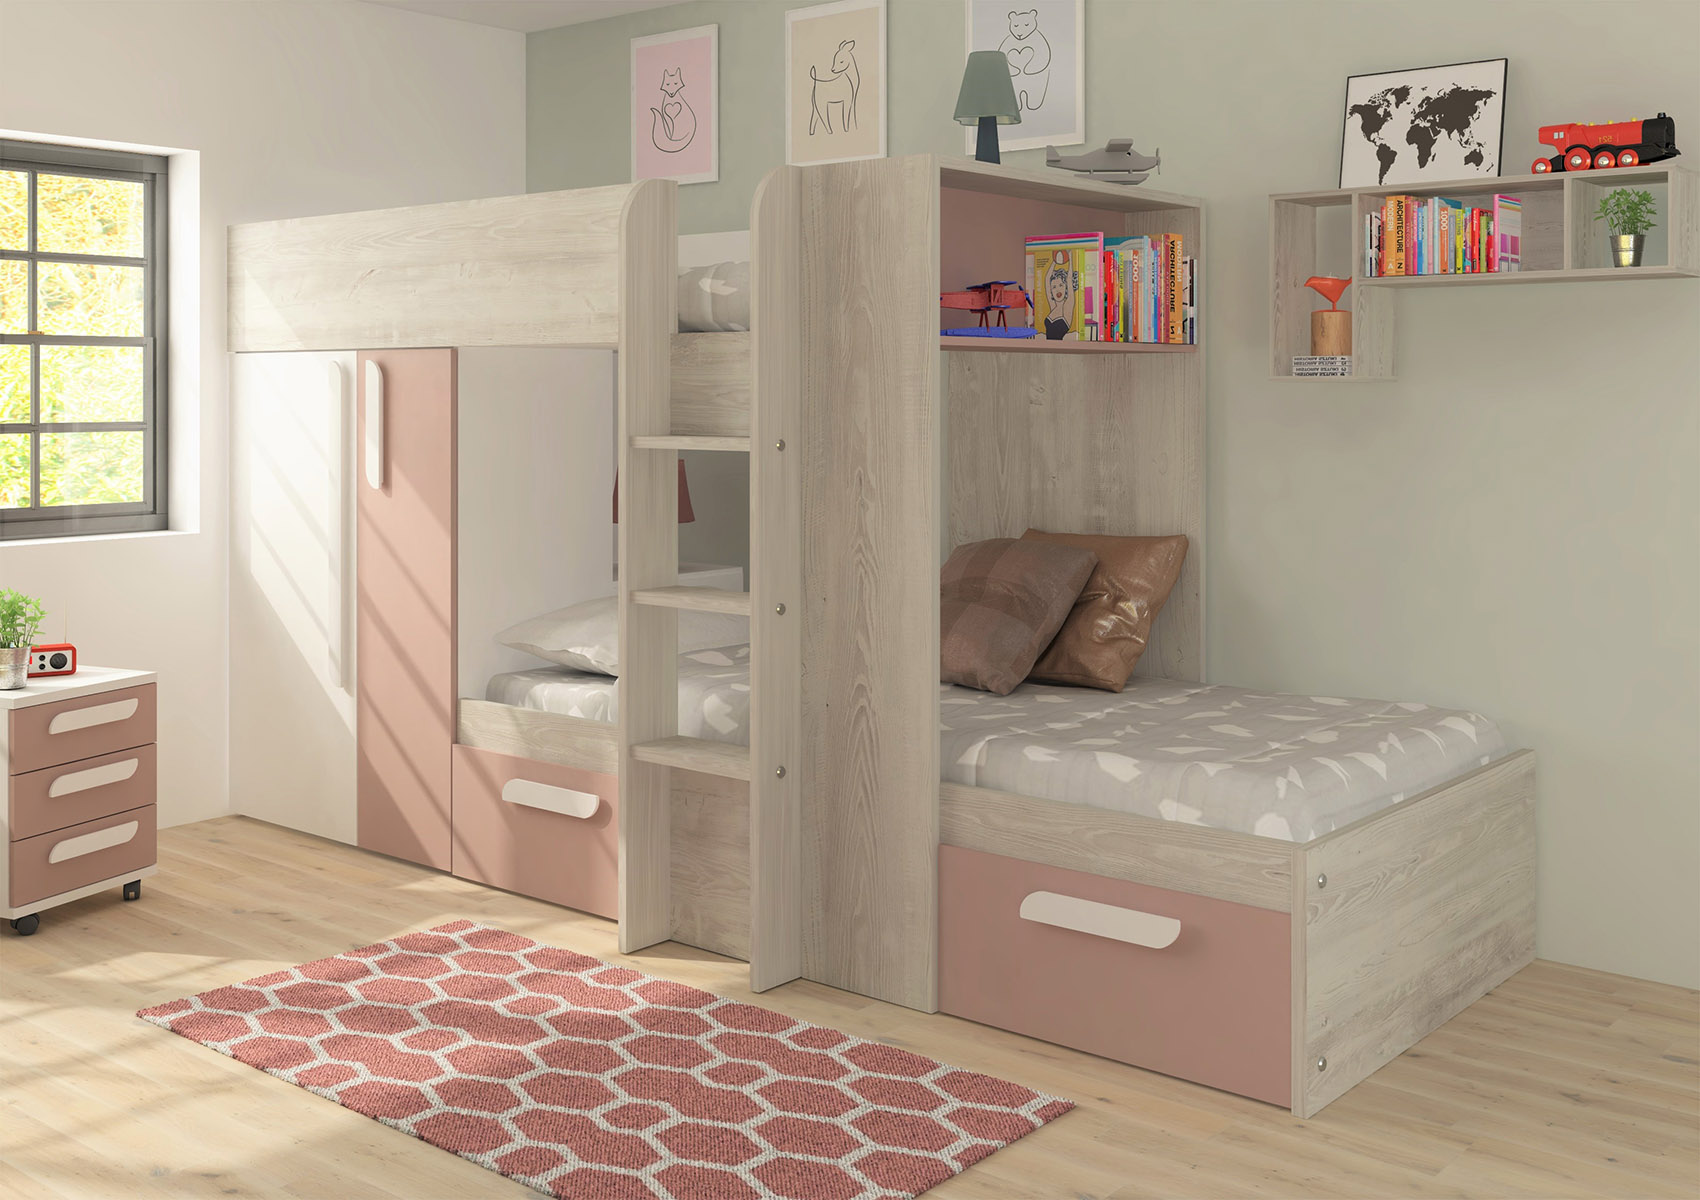 View Barca Pink Bunkbed Bed Frame Time4Sleep information